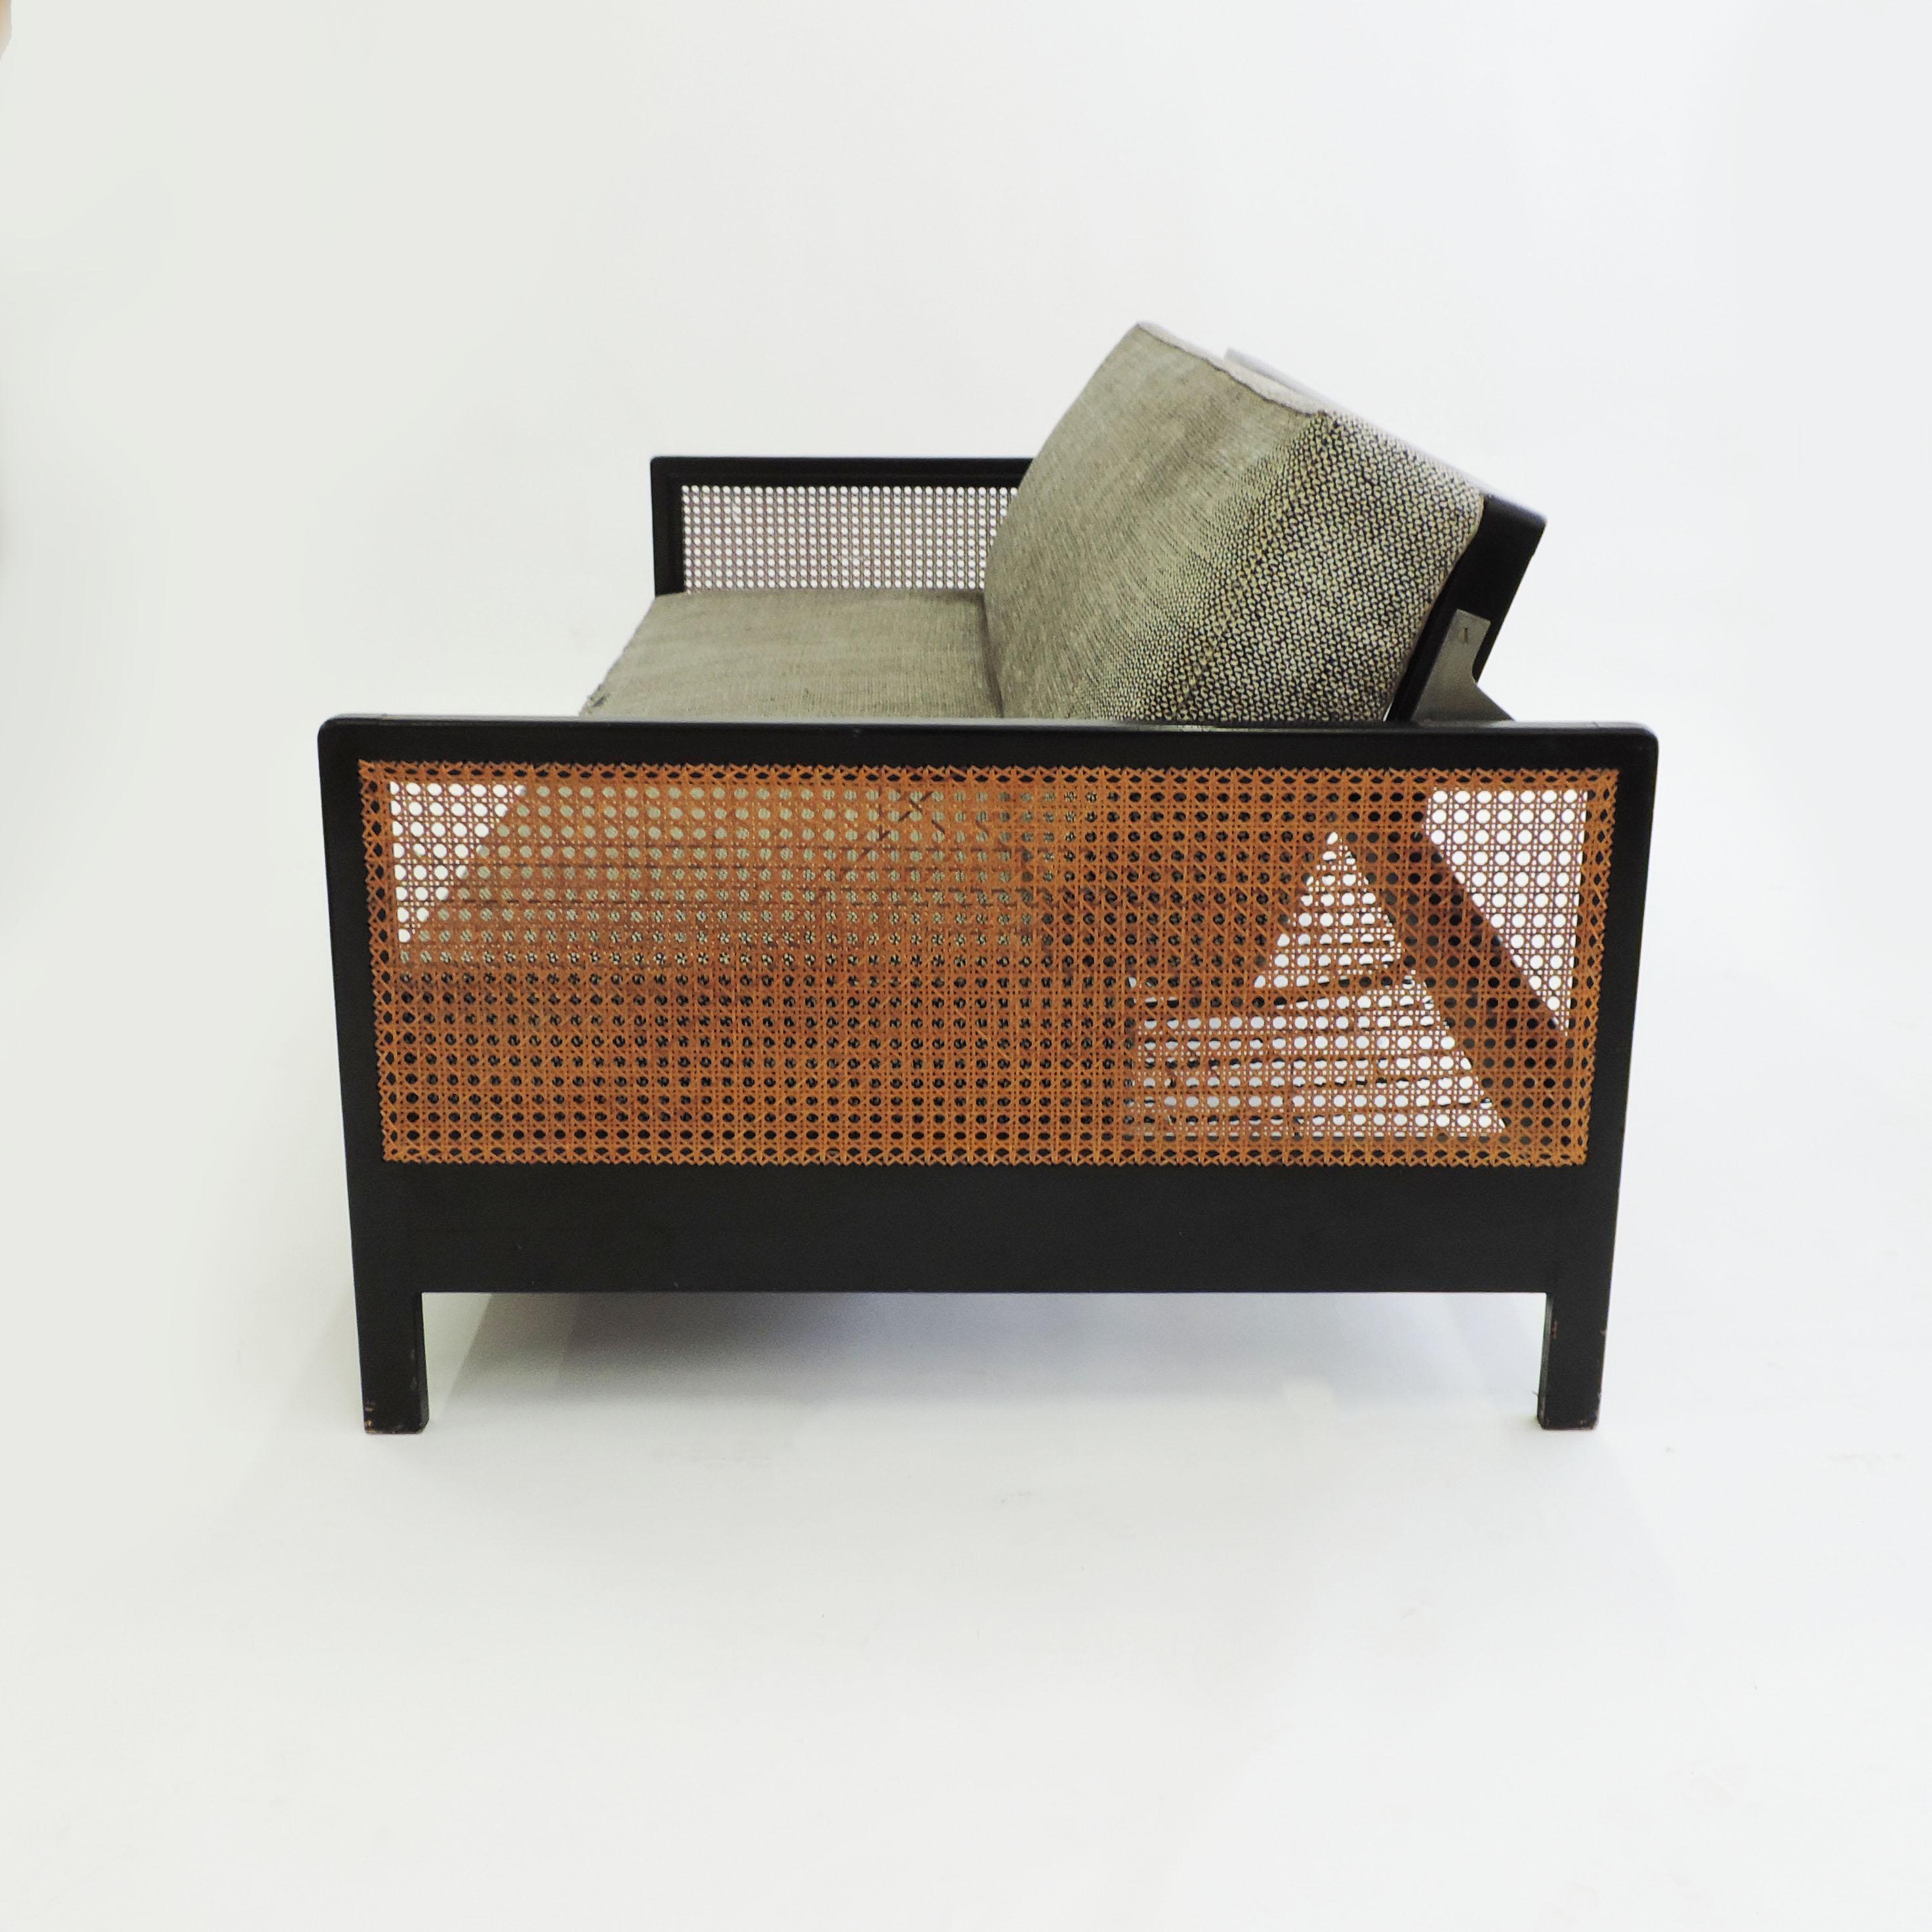 Mid-20th Century Werner Max Moser Sofa for Wohnbedarf, Switzerland, 1930s For Sale